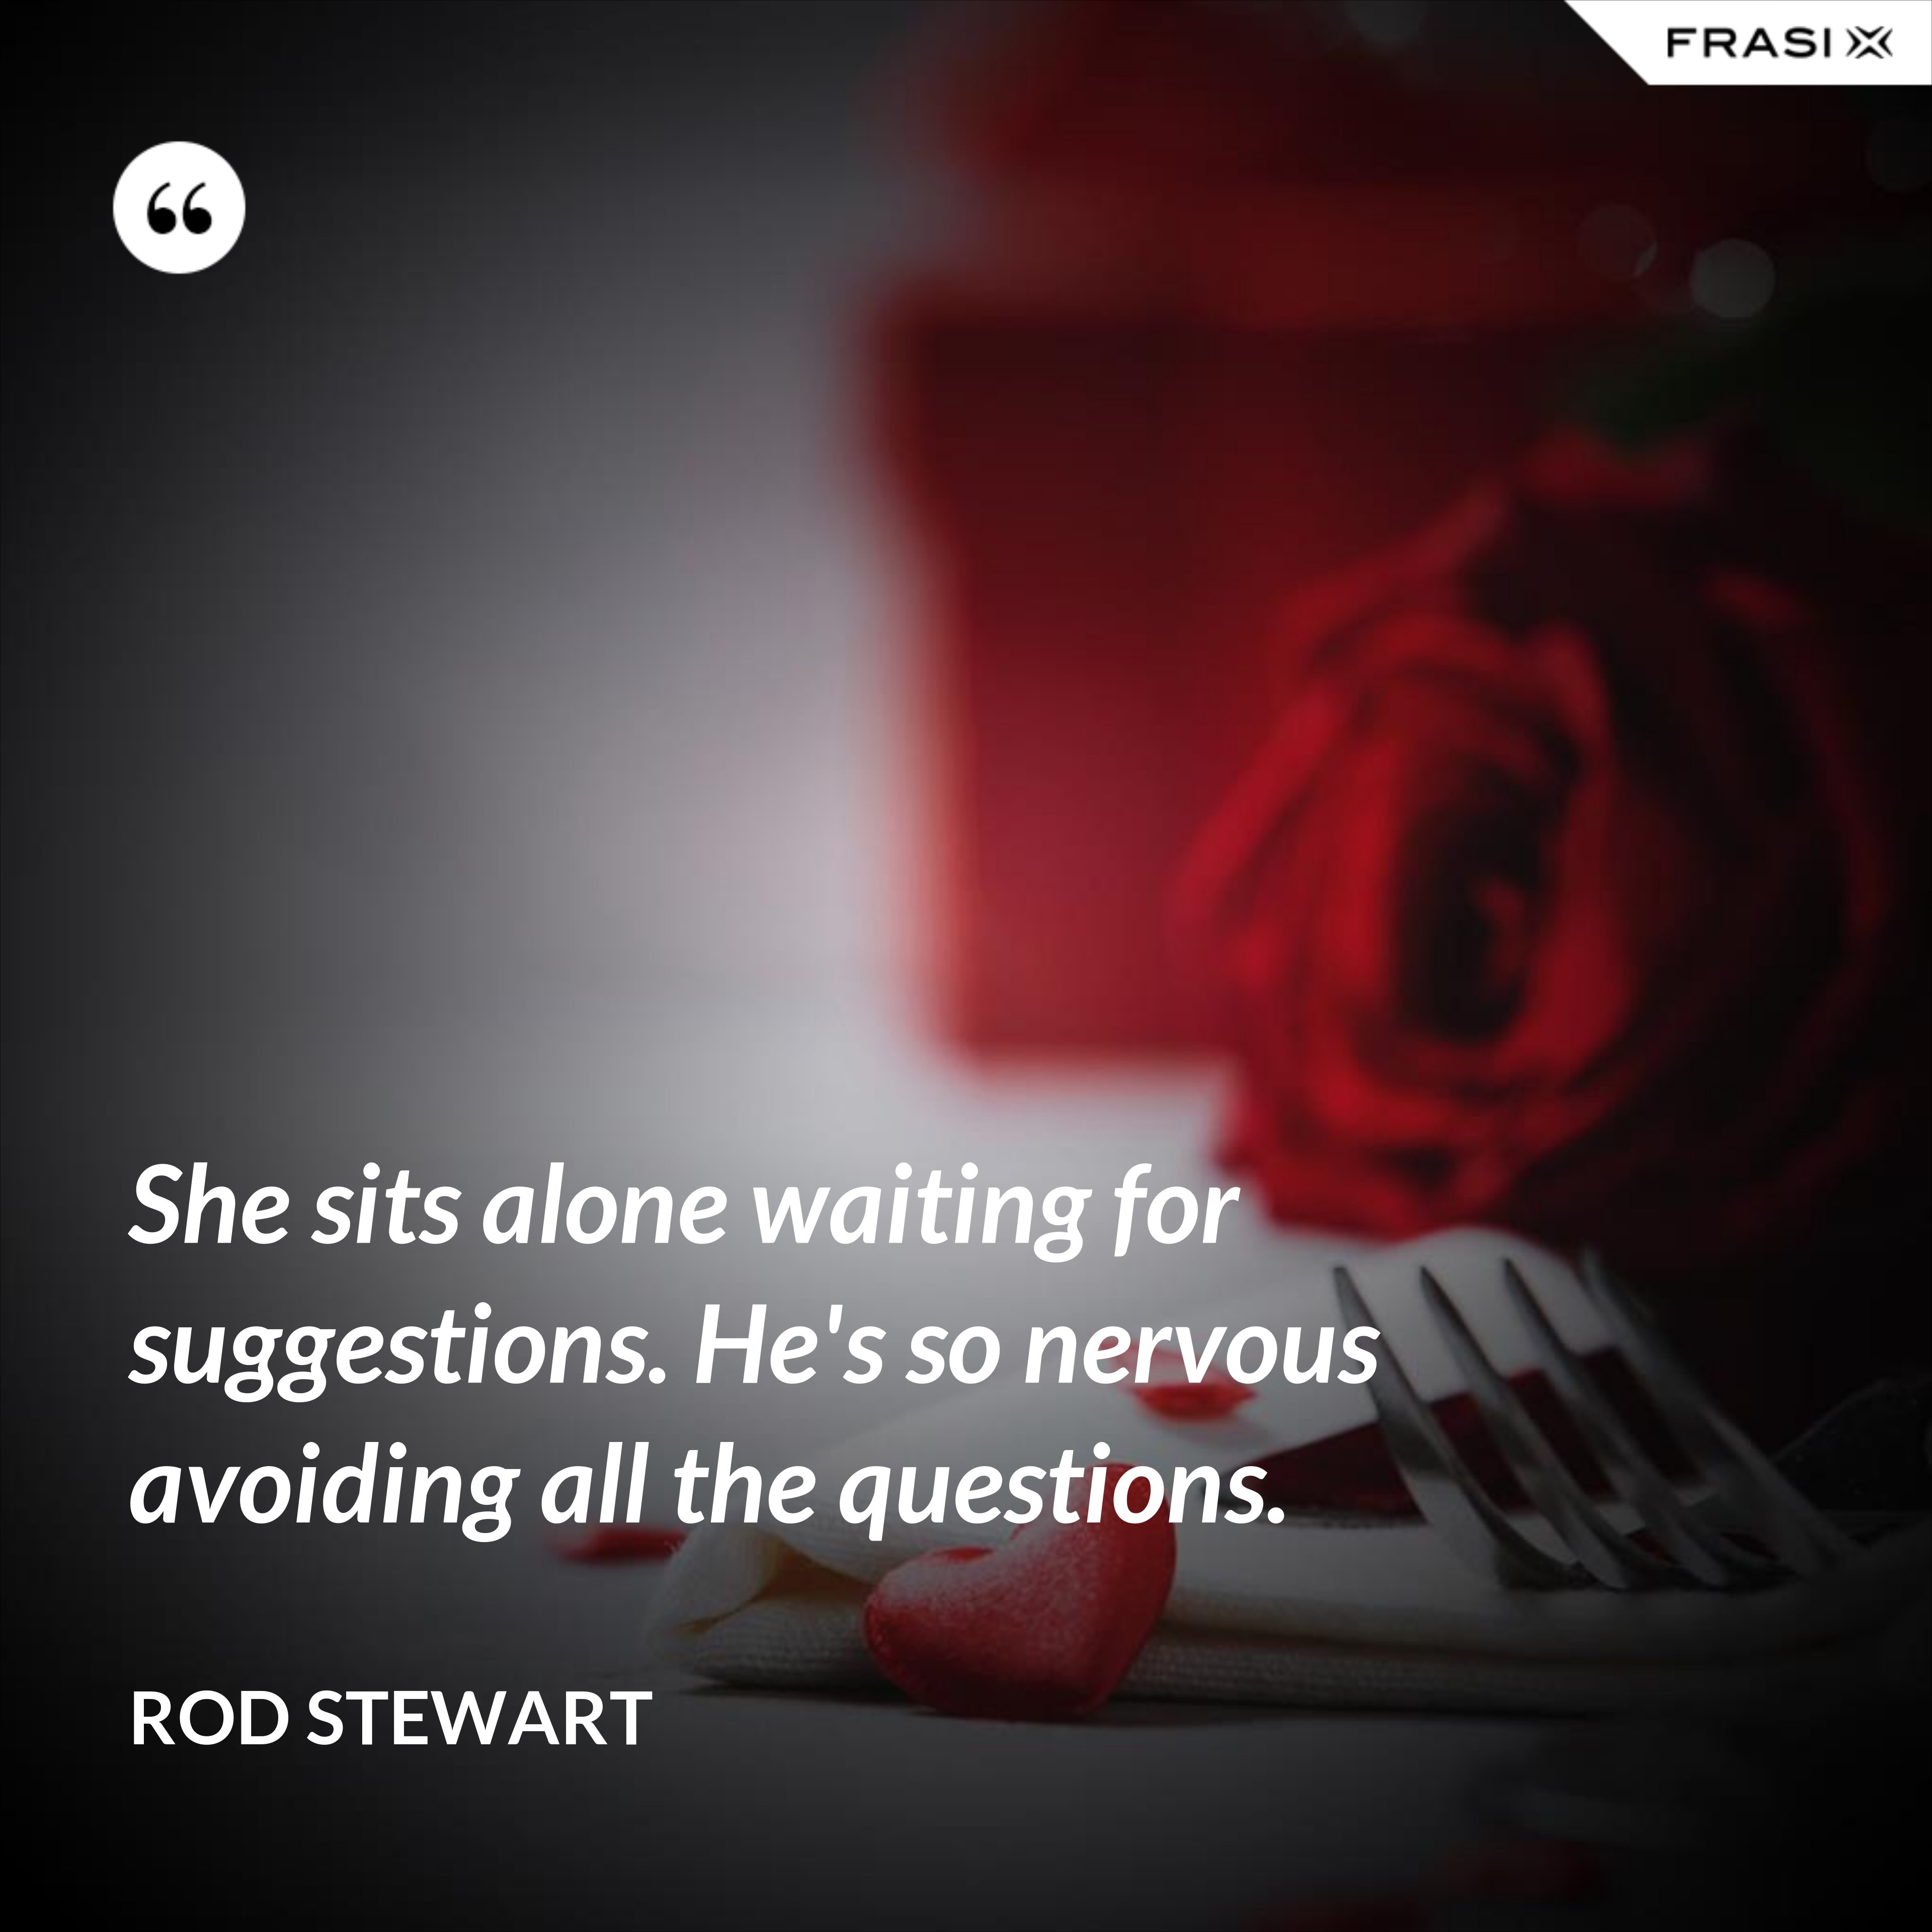 She sits alone waiting for suggestions. He's so nervous avoiding all the questions. - Rod Stewart